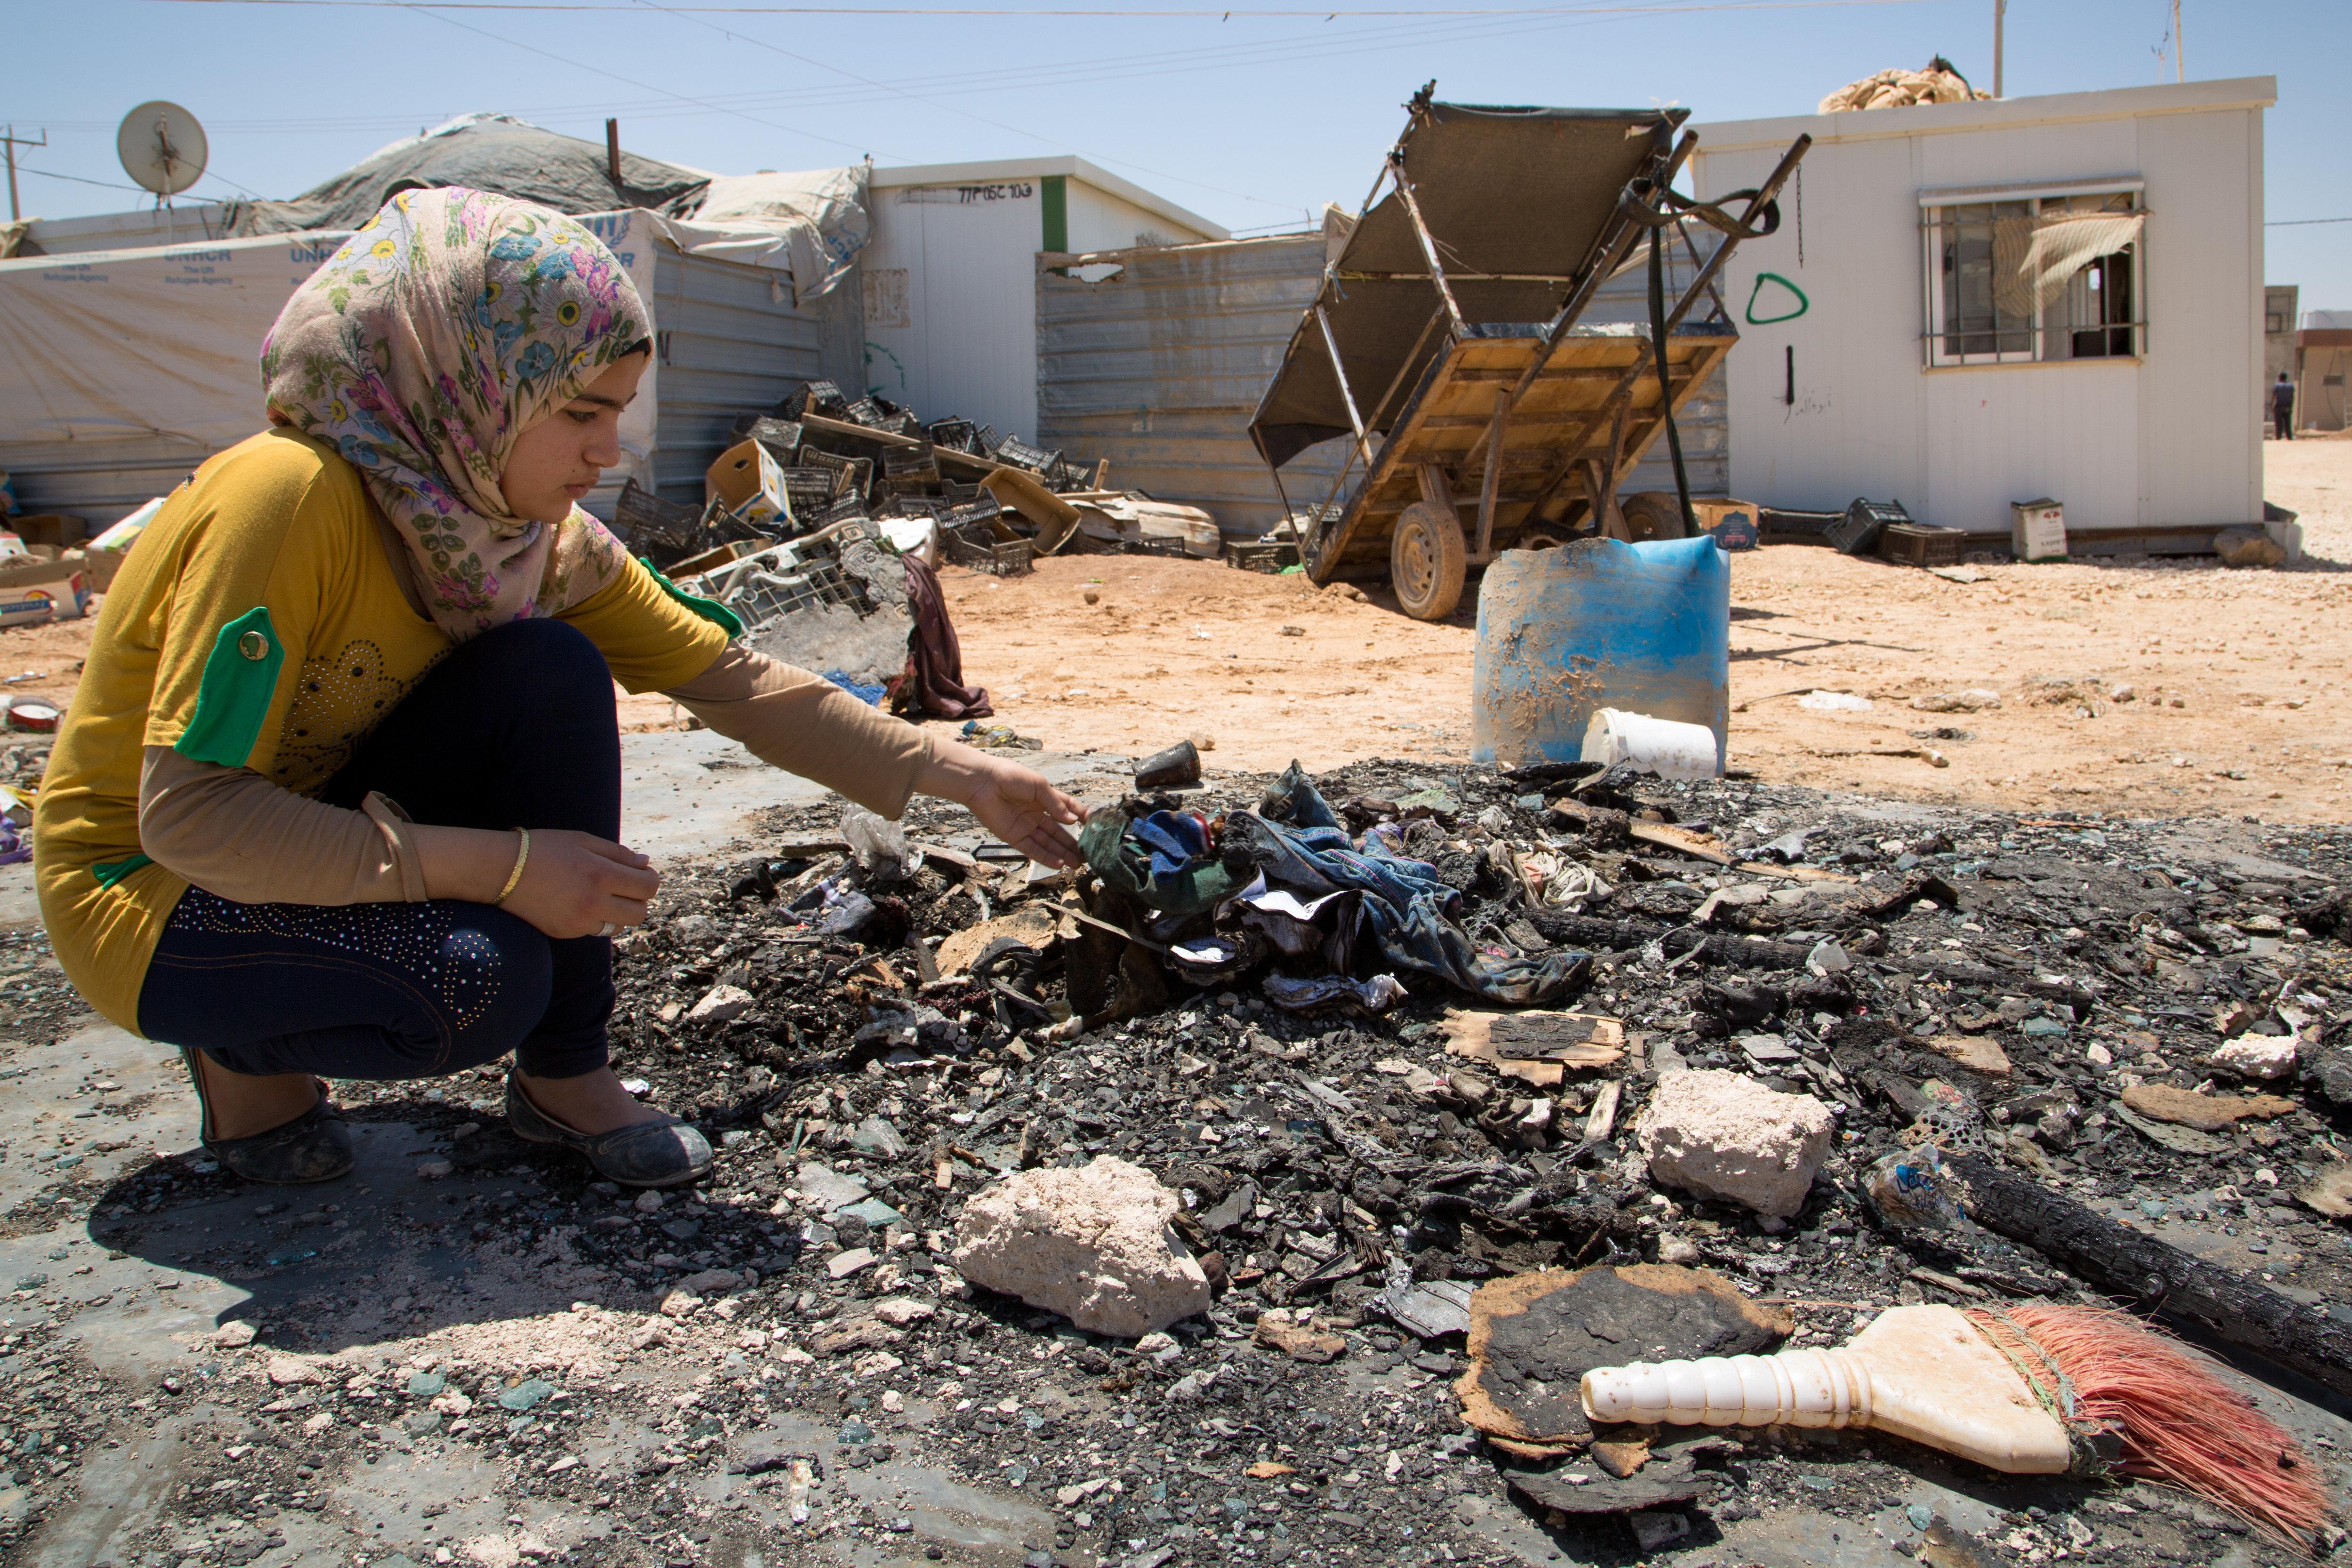 A young woman in Zaâatari camp, Jordan. Photo: LWF/ M. de la Guardia